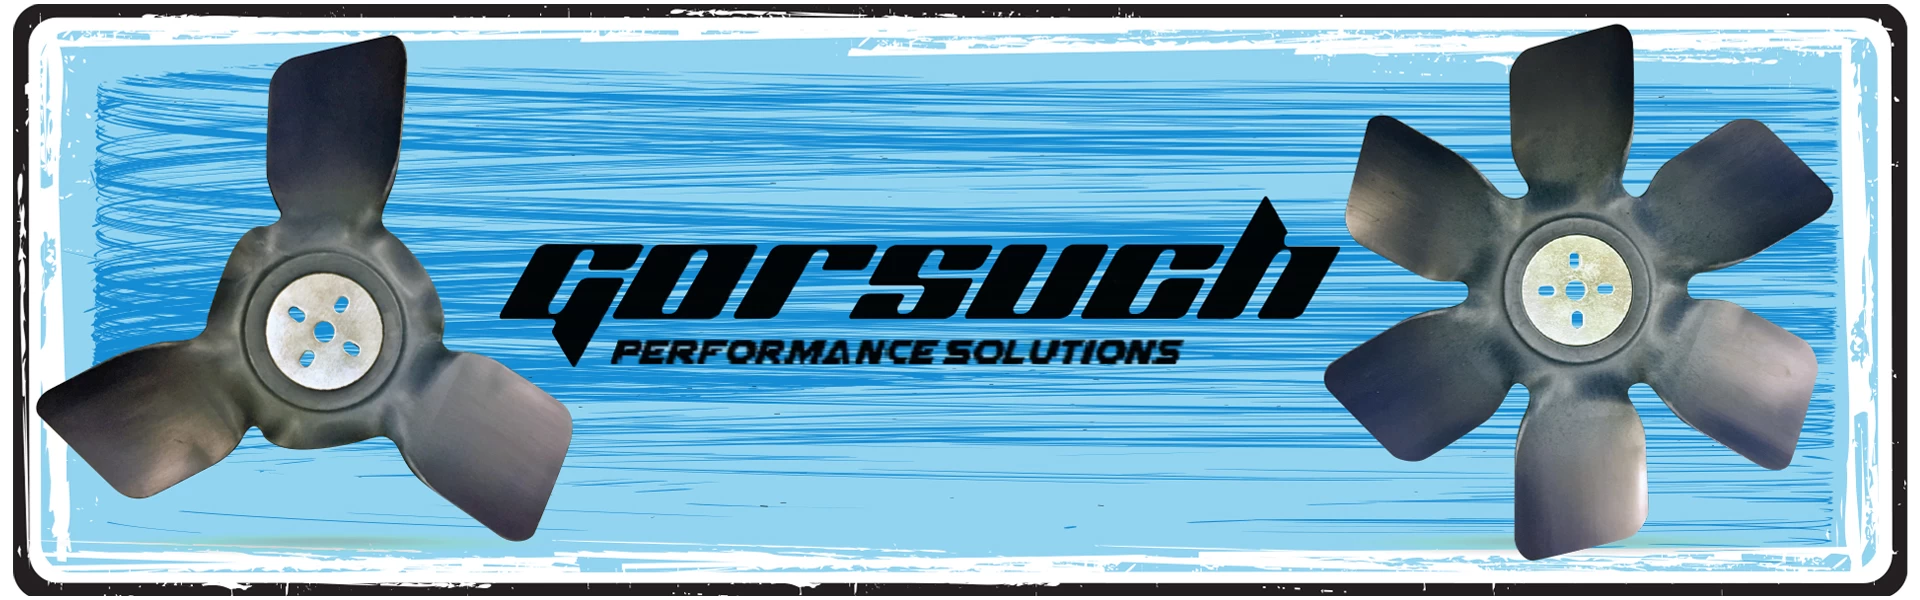 Fans from Gorsuch Performance Solutions available at Day Motor Sports.